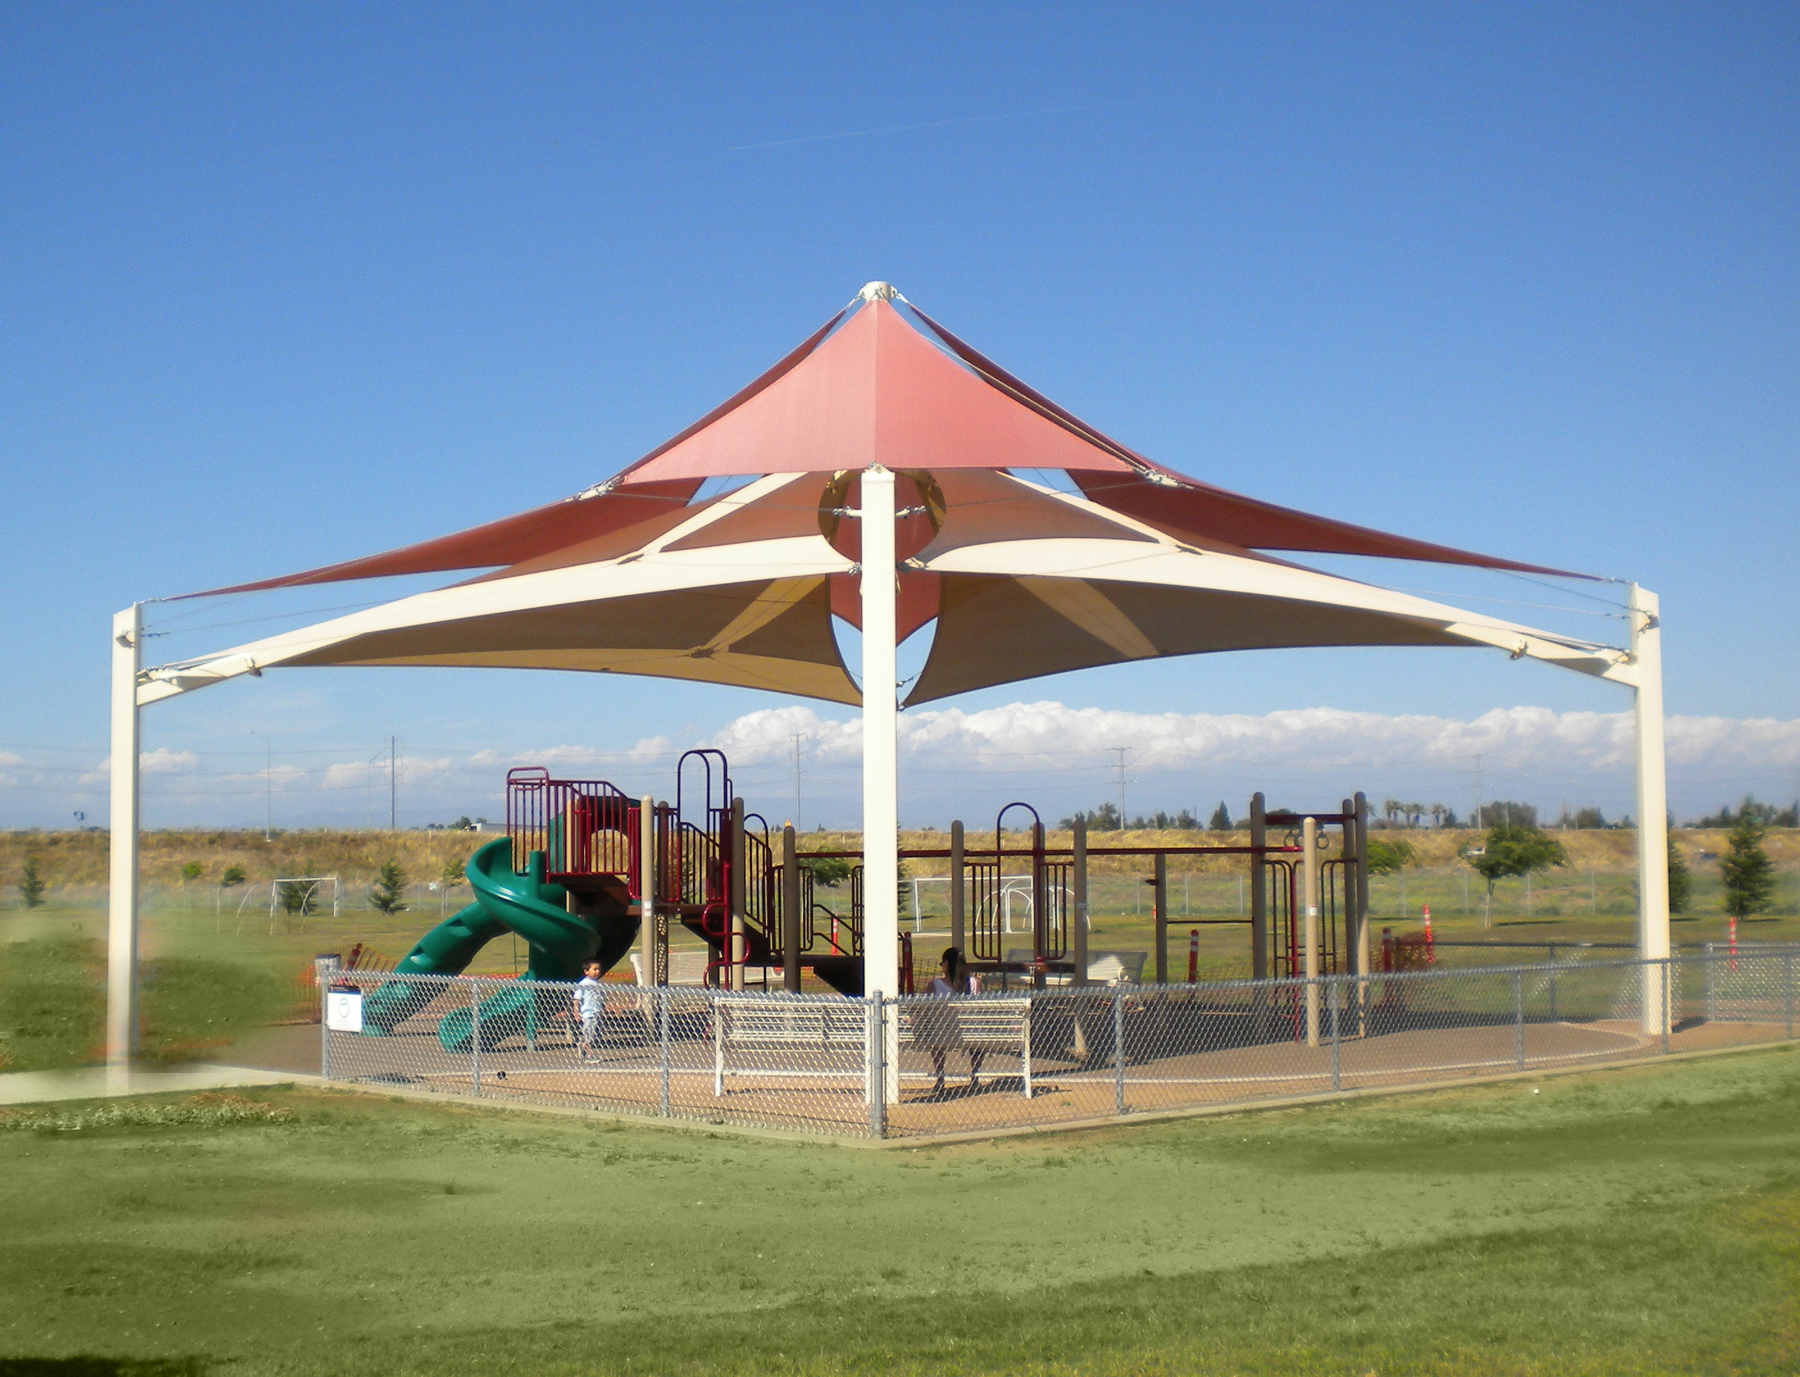 shade covering playground at park